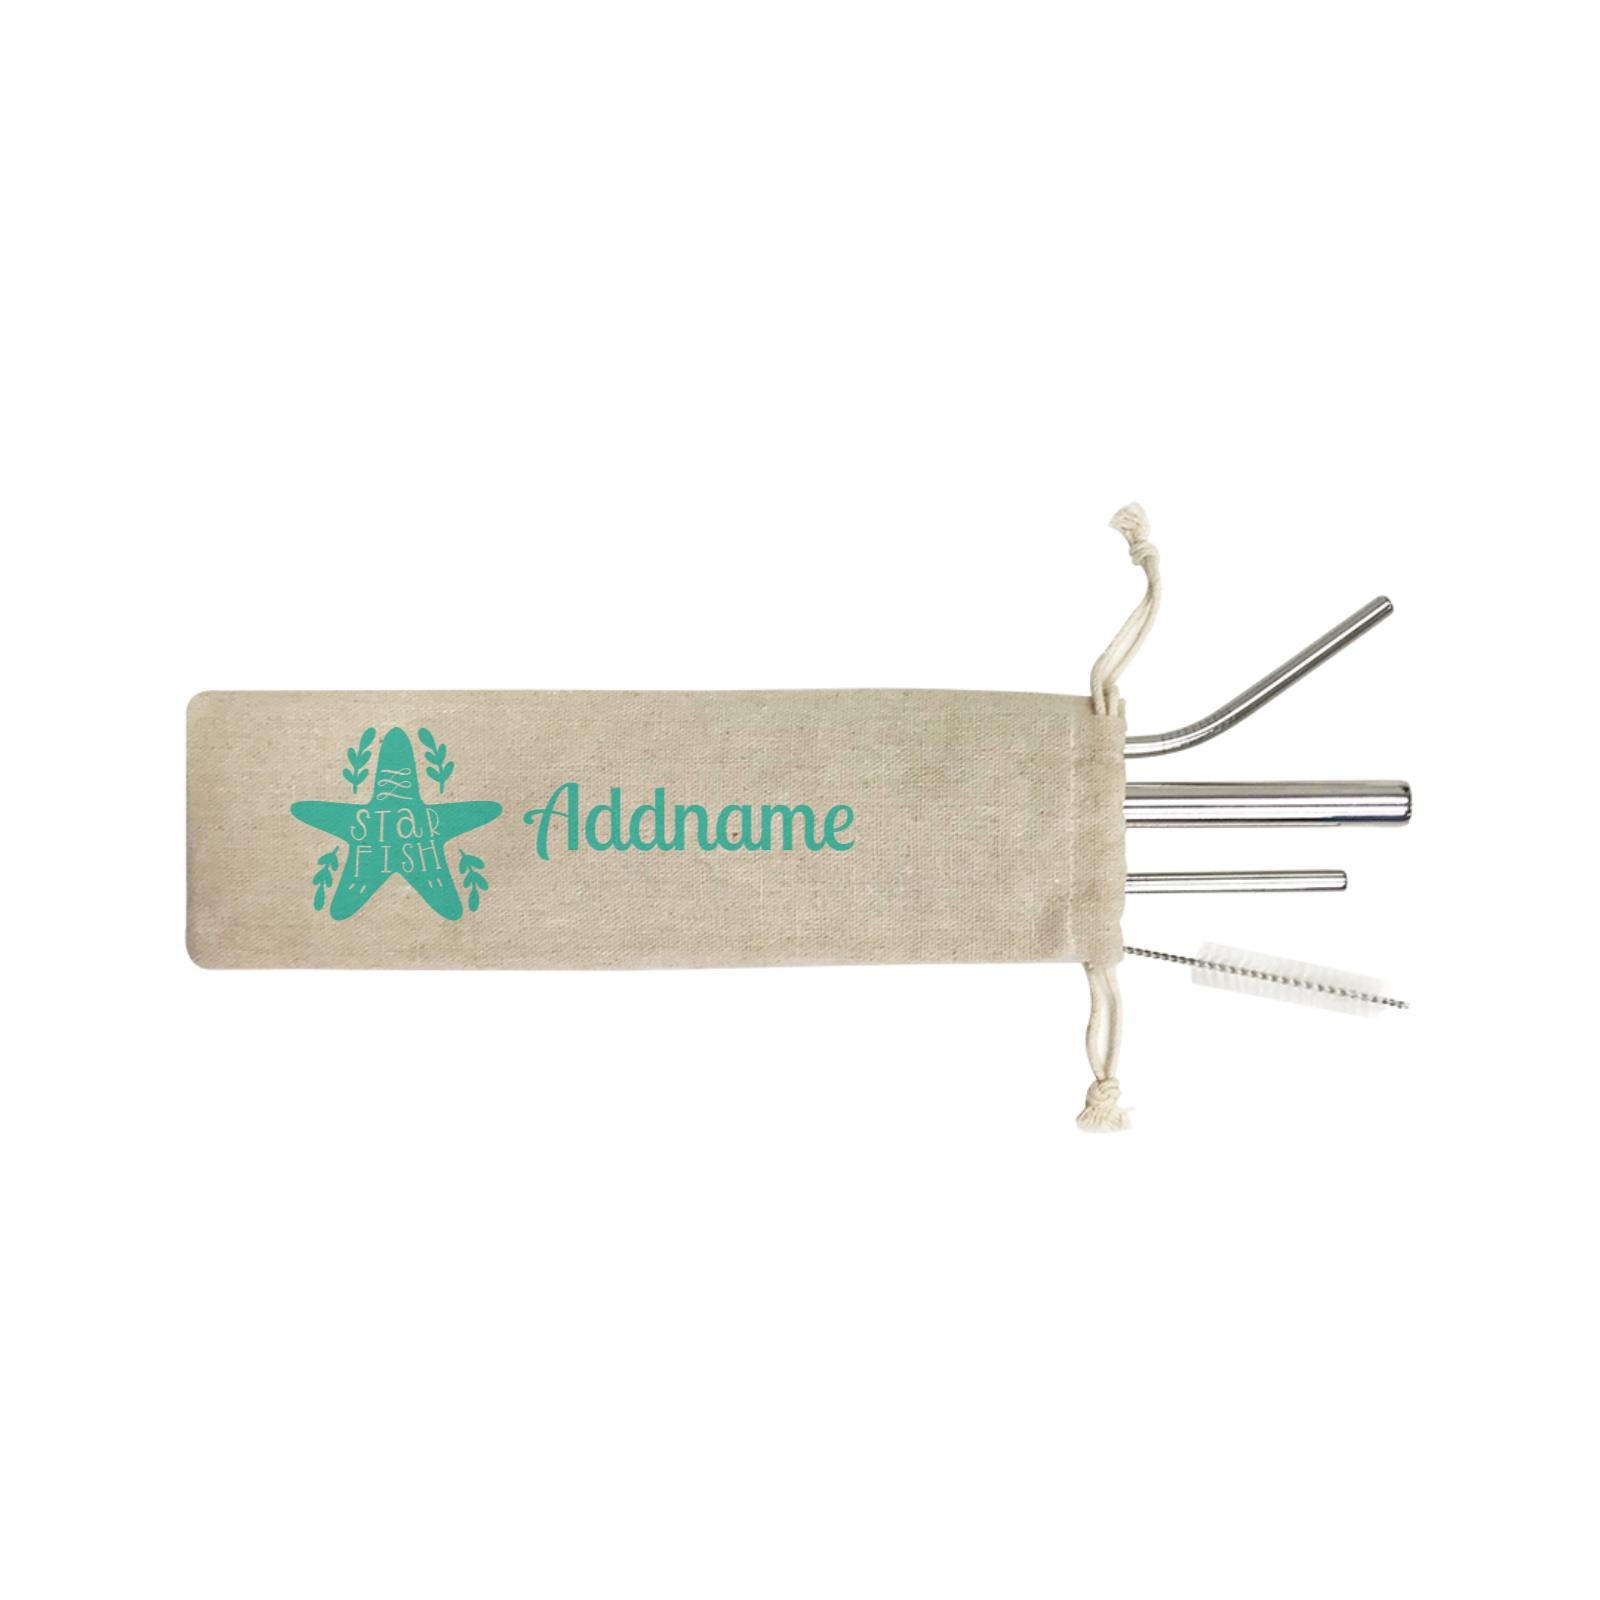 Sea Animal Silhouettes Starfish Addname SB 4-in-1 Stainless Steel Straw Set In a Satchel